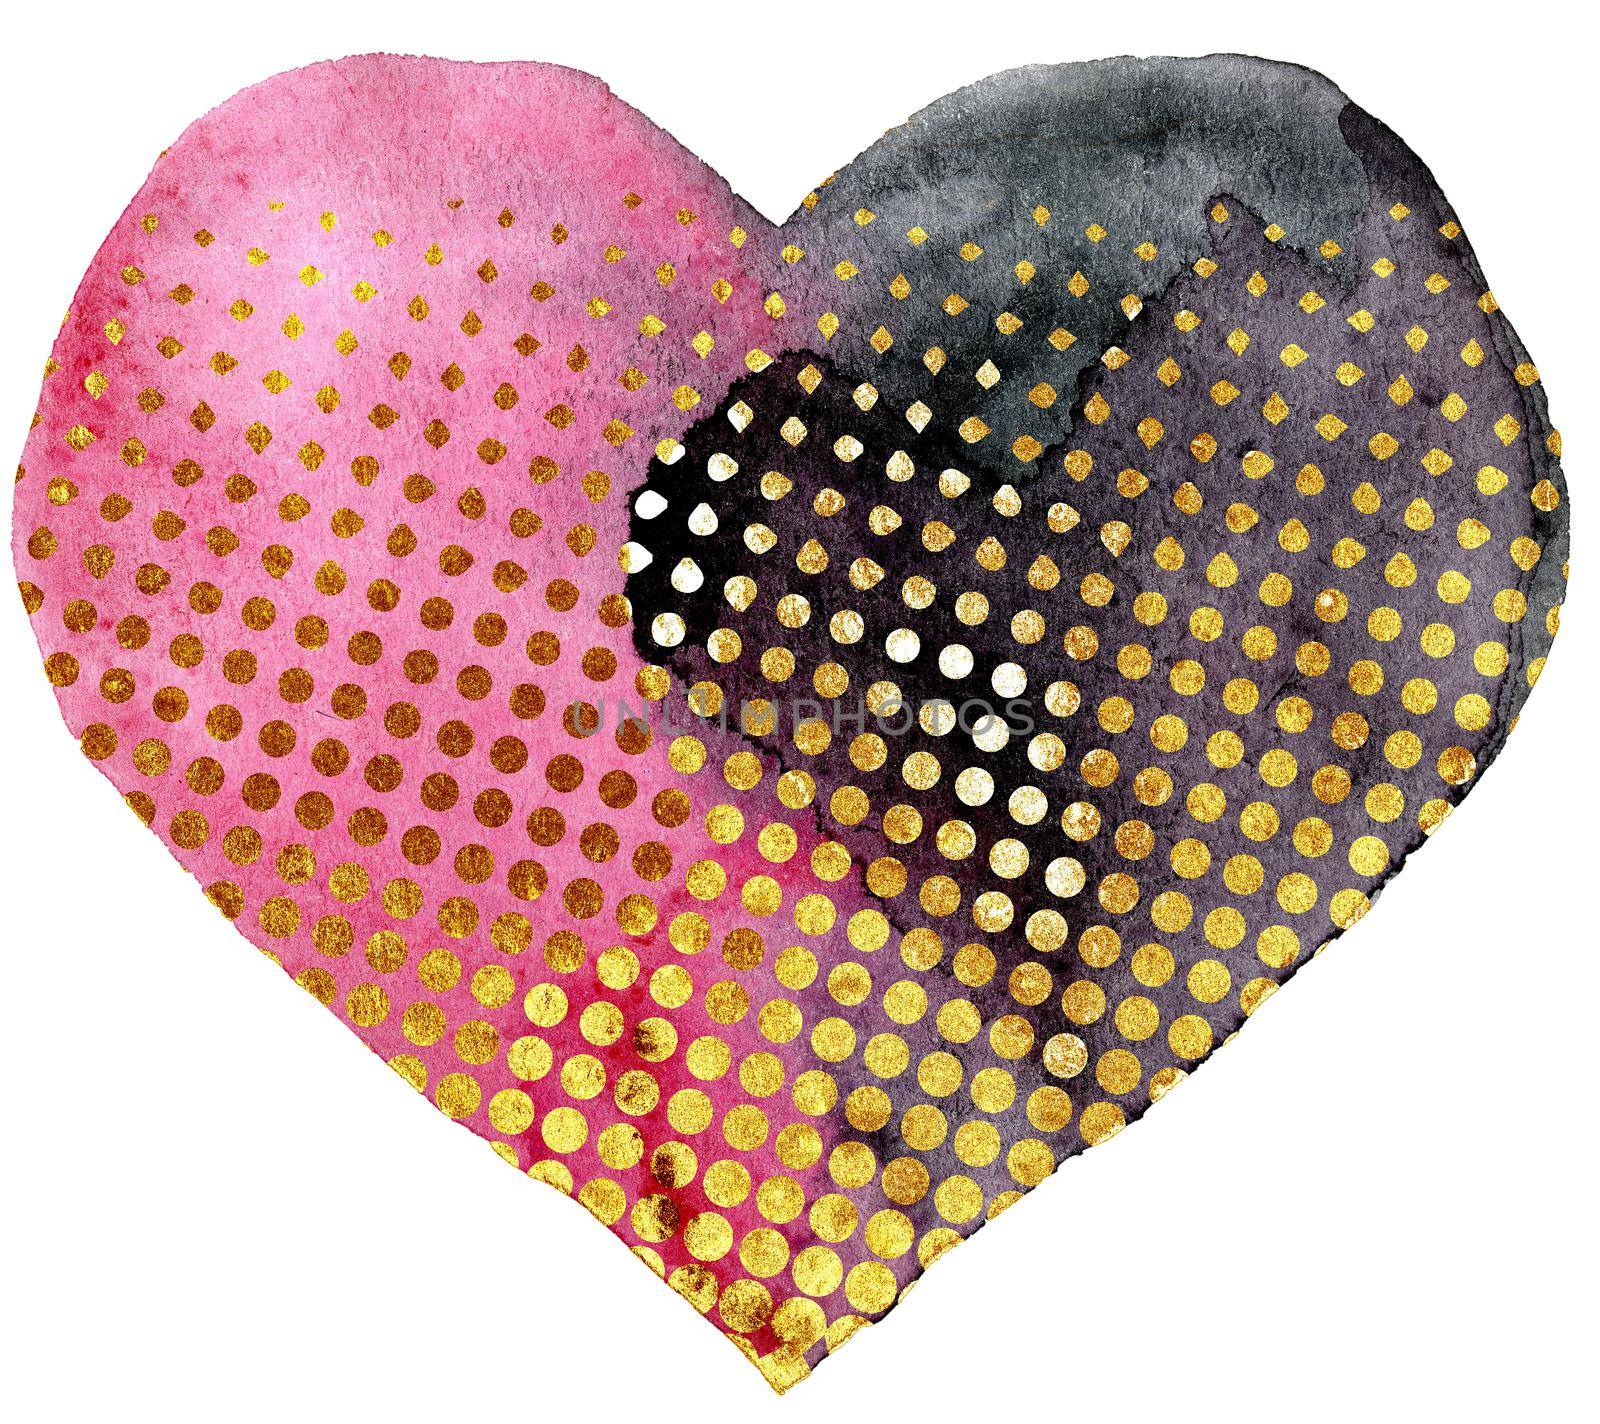 Watercolor black heart with gold dots on white background by NataOmsk